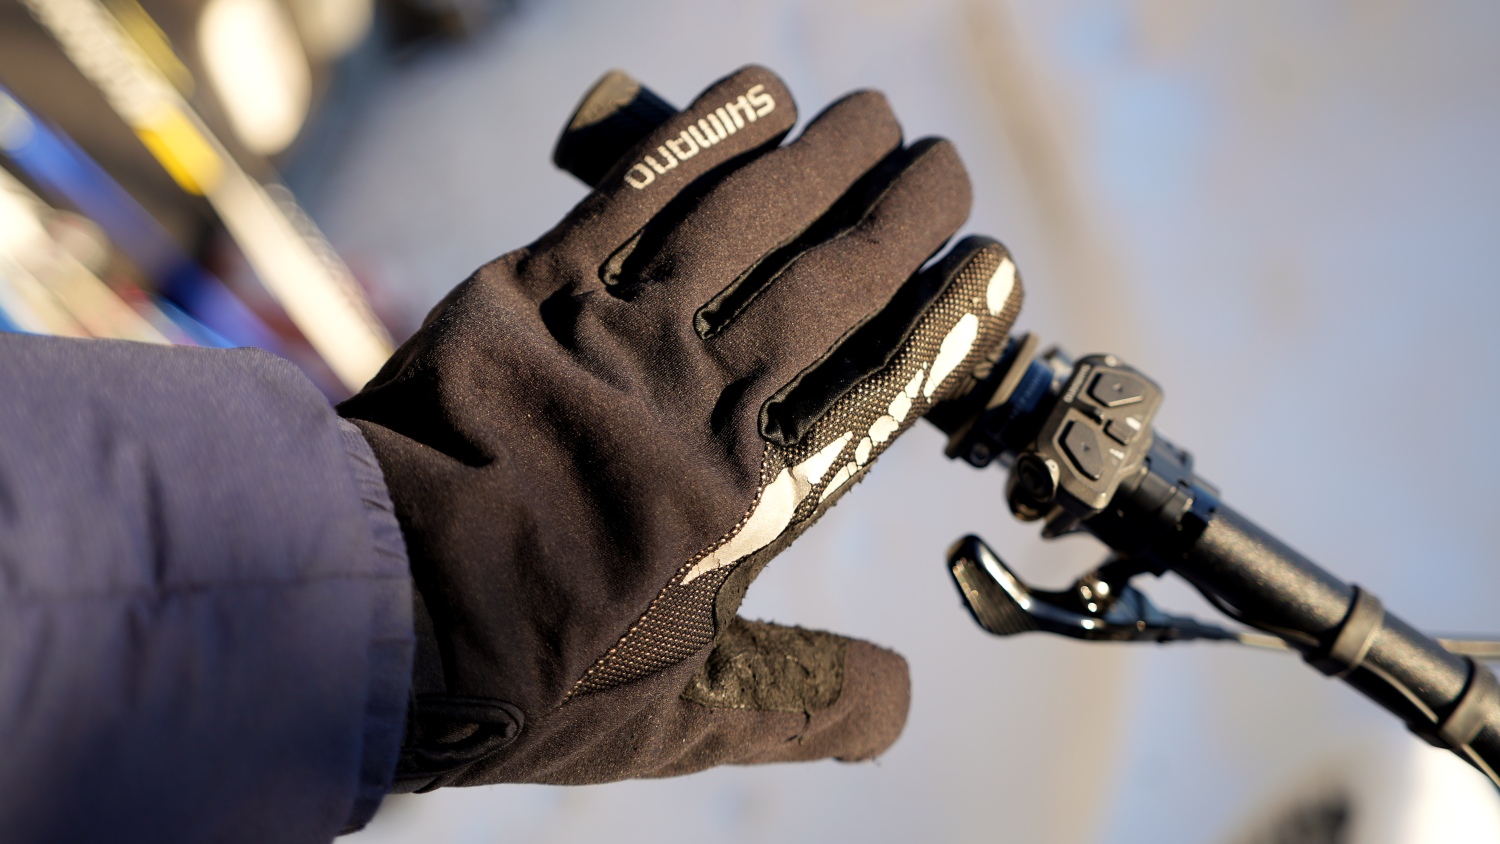 I use lightly insulated gloves down to around 0*C.